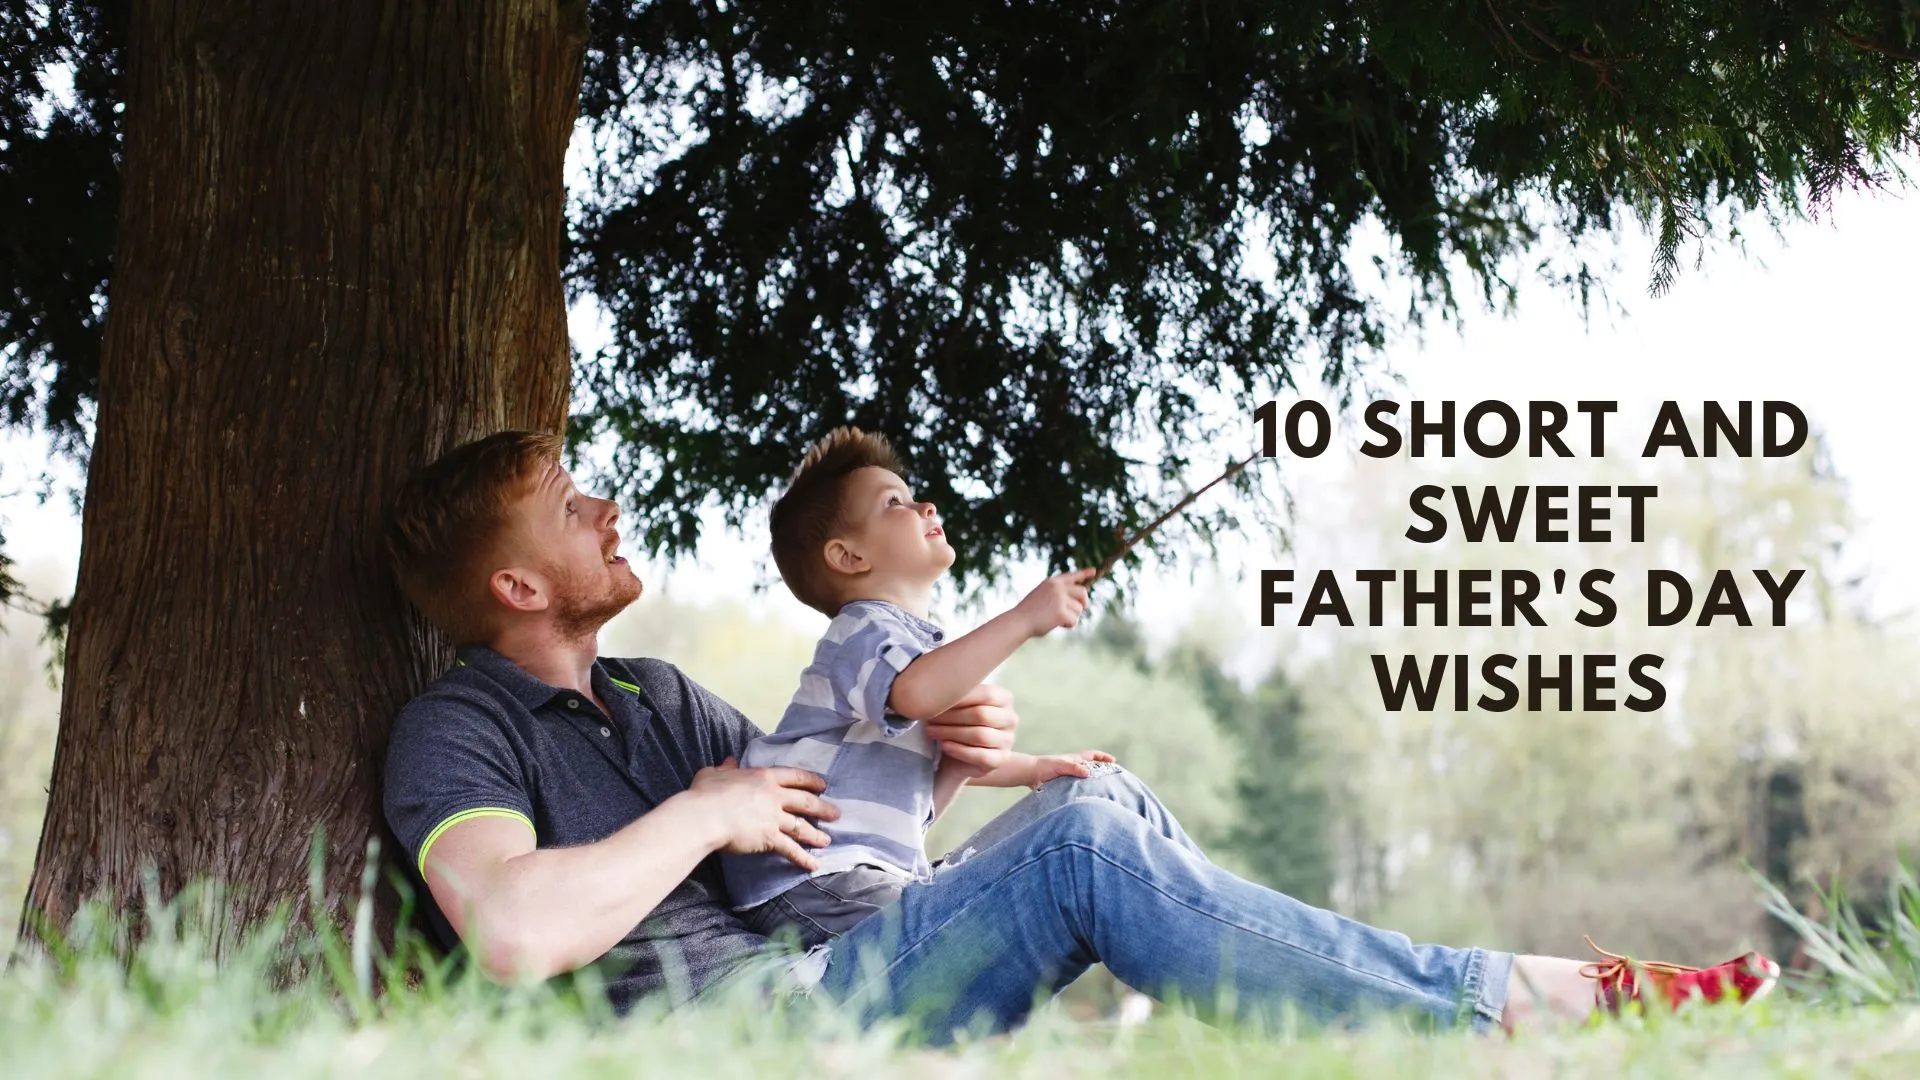 10 Short and Sweet Father's Day Wishes 